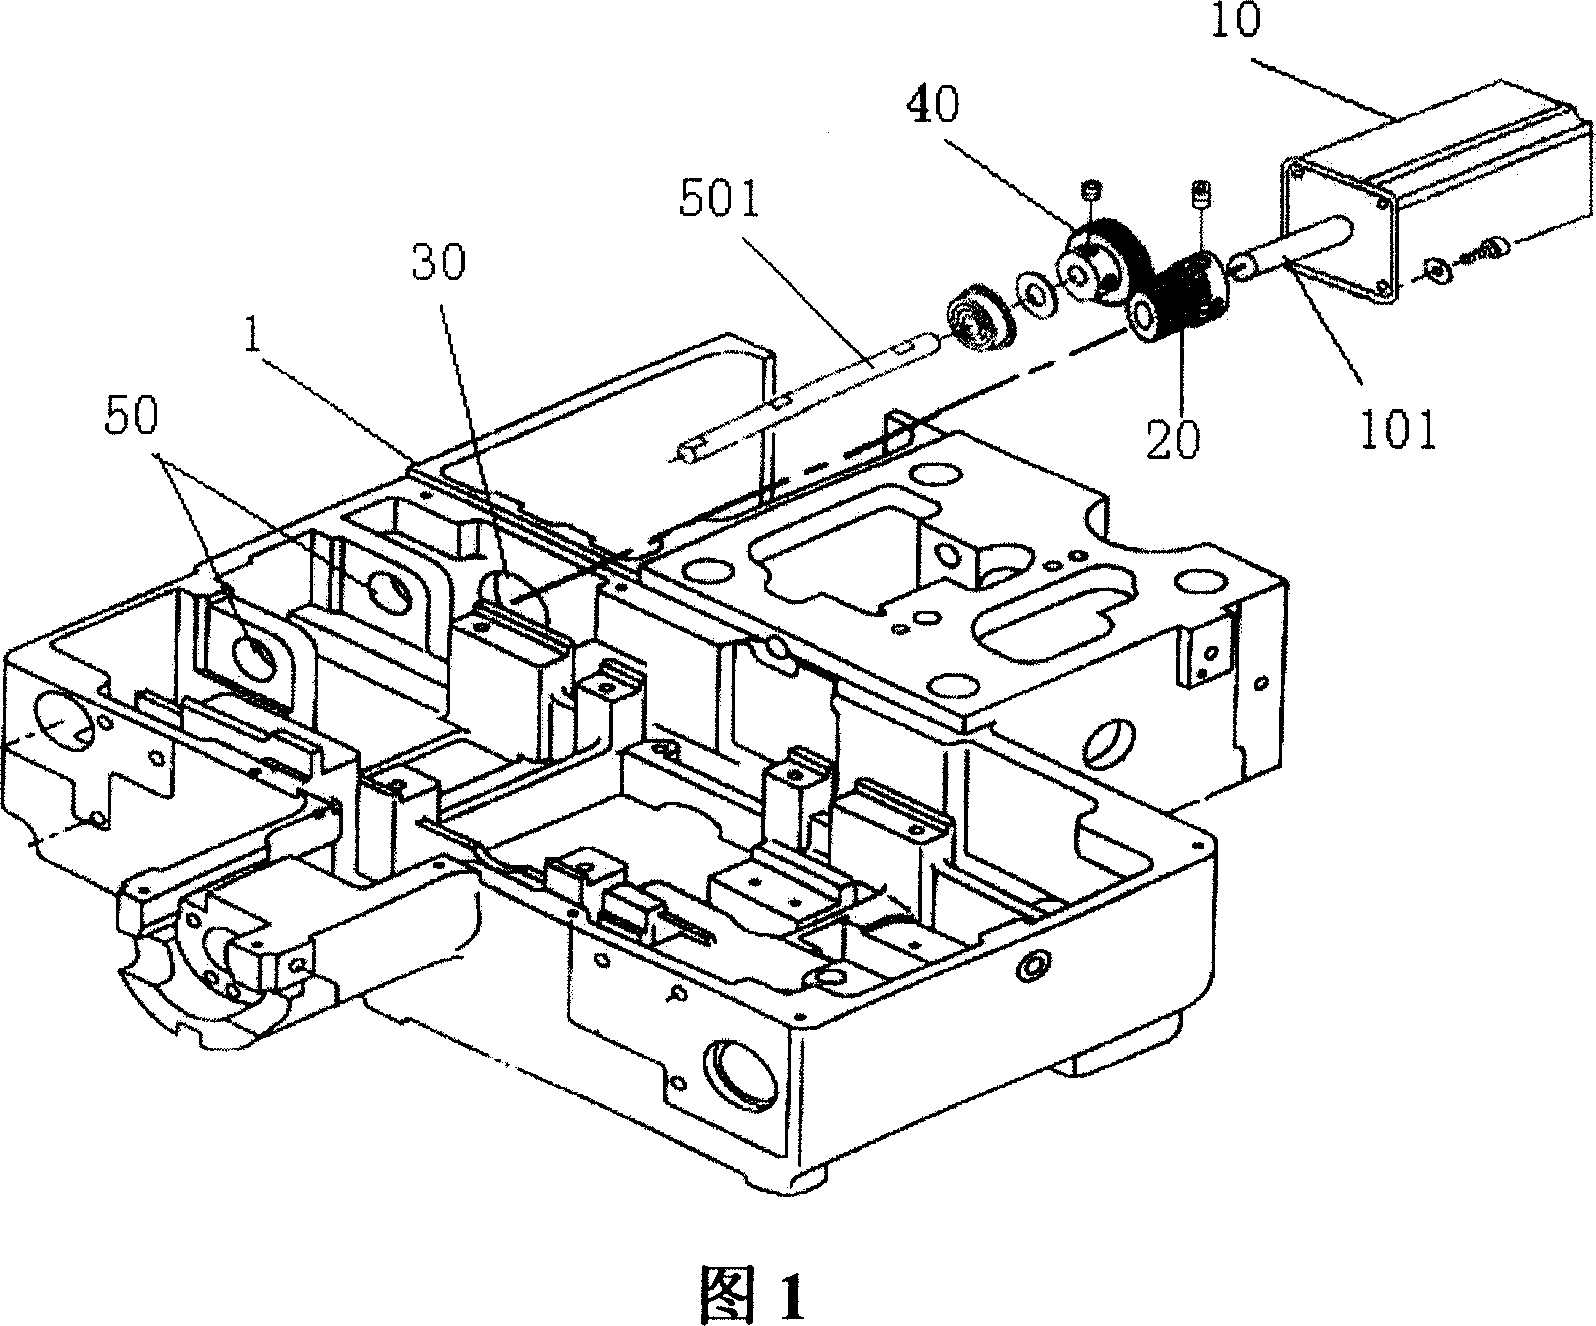 Mechanism for regulating drive at X-direction and inter space of driven gear in electro-pattern-sewing machine